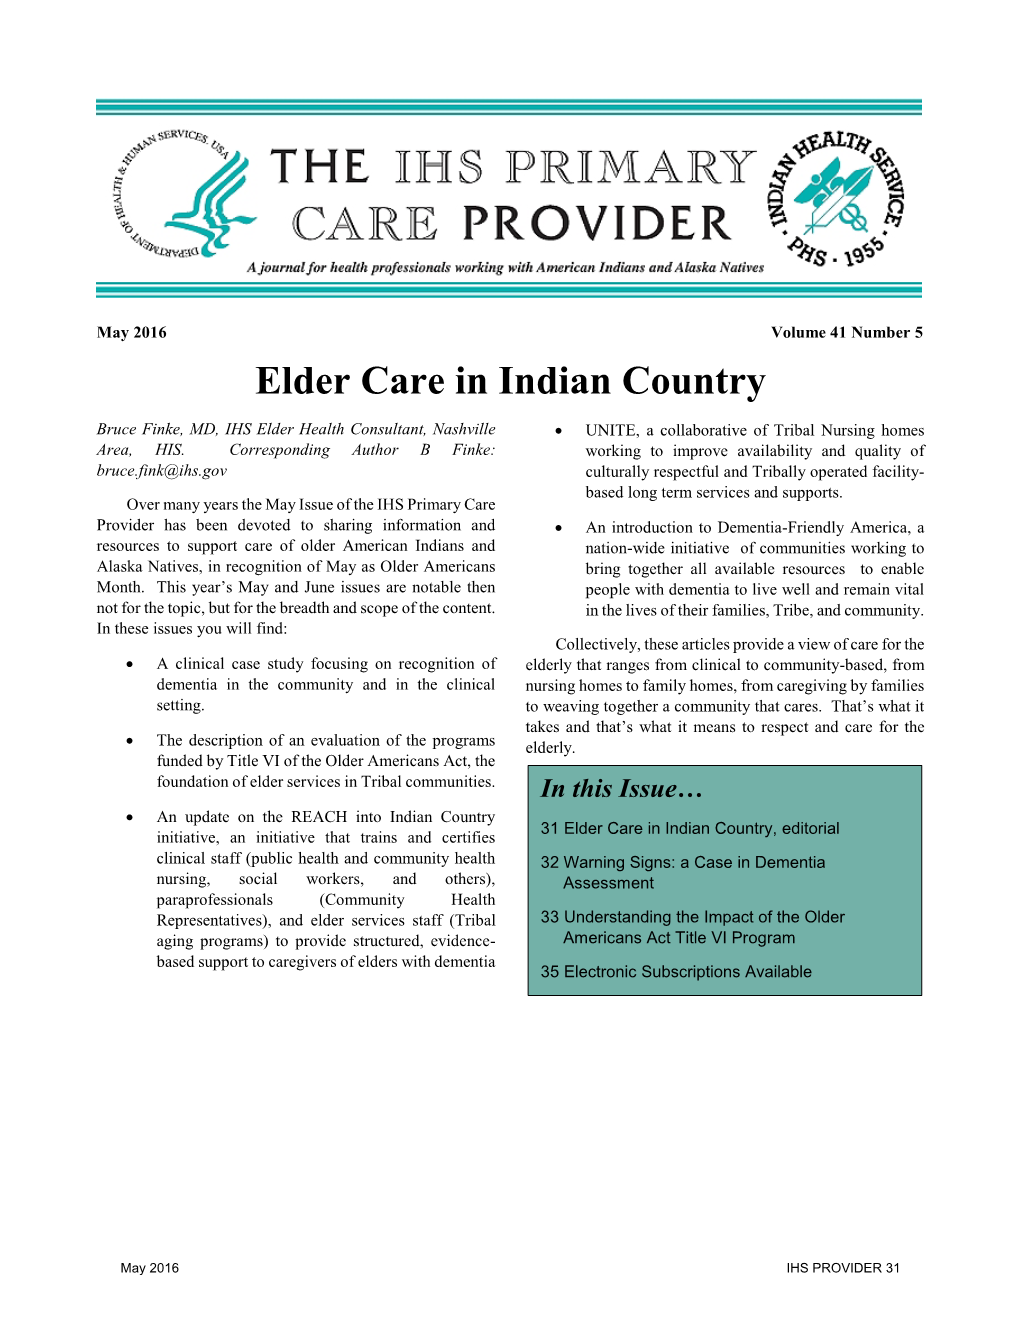 The IHS Primary Care Provider May 2016